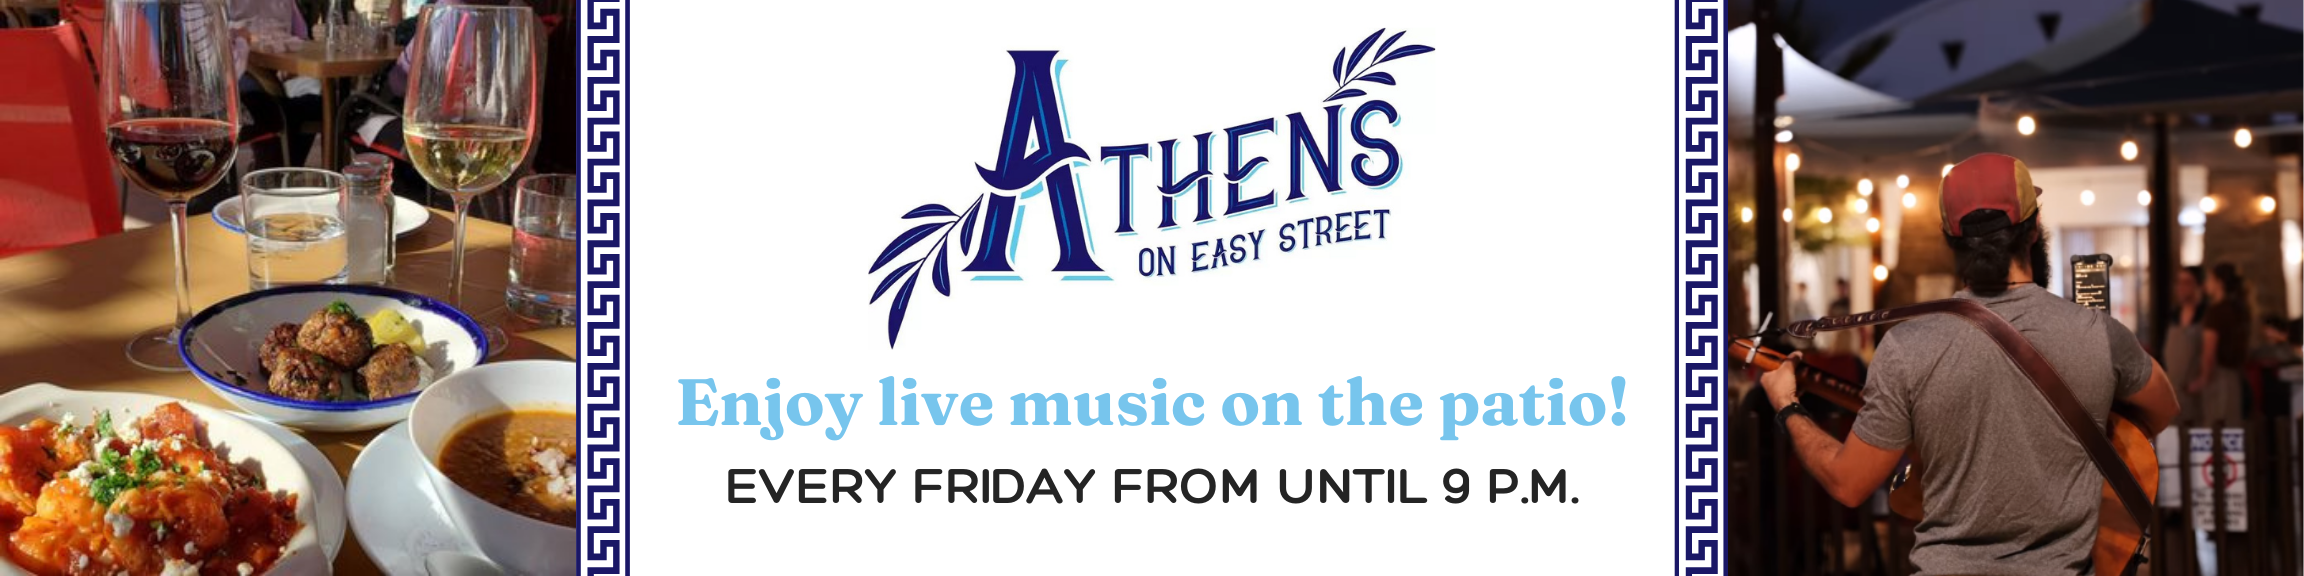 Advertisement for Athens on Easy Street, a Greek restaurant. The text reads "Athens on Easy Street" with "Enjoy live music on the patio! EVERY FRIDAY FROM until 9 PM" below.